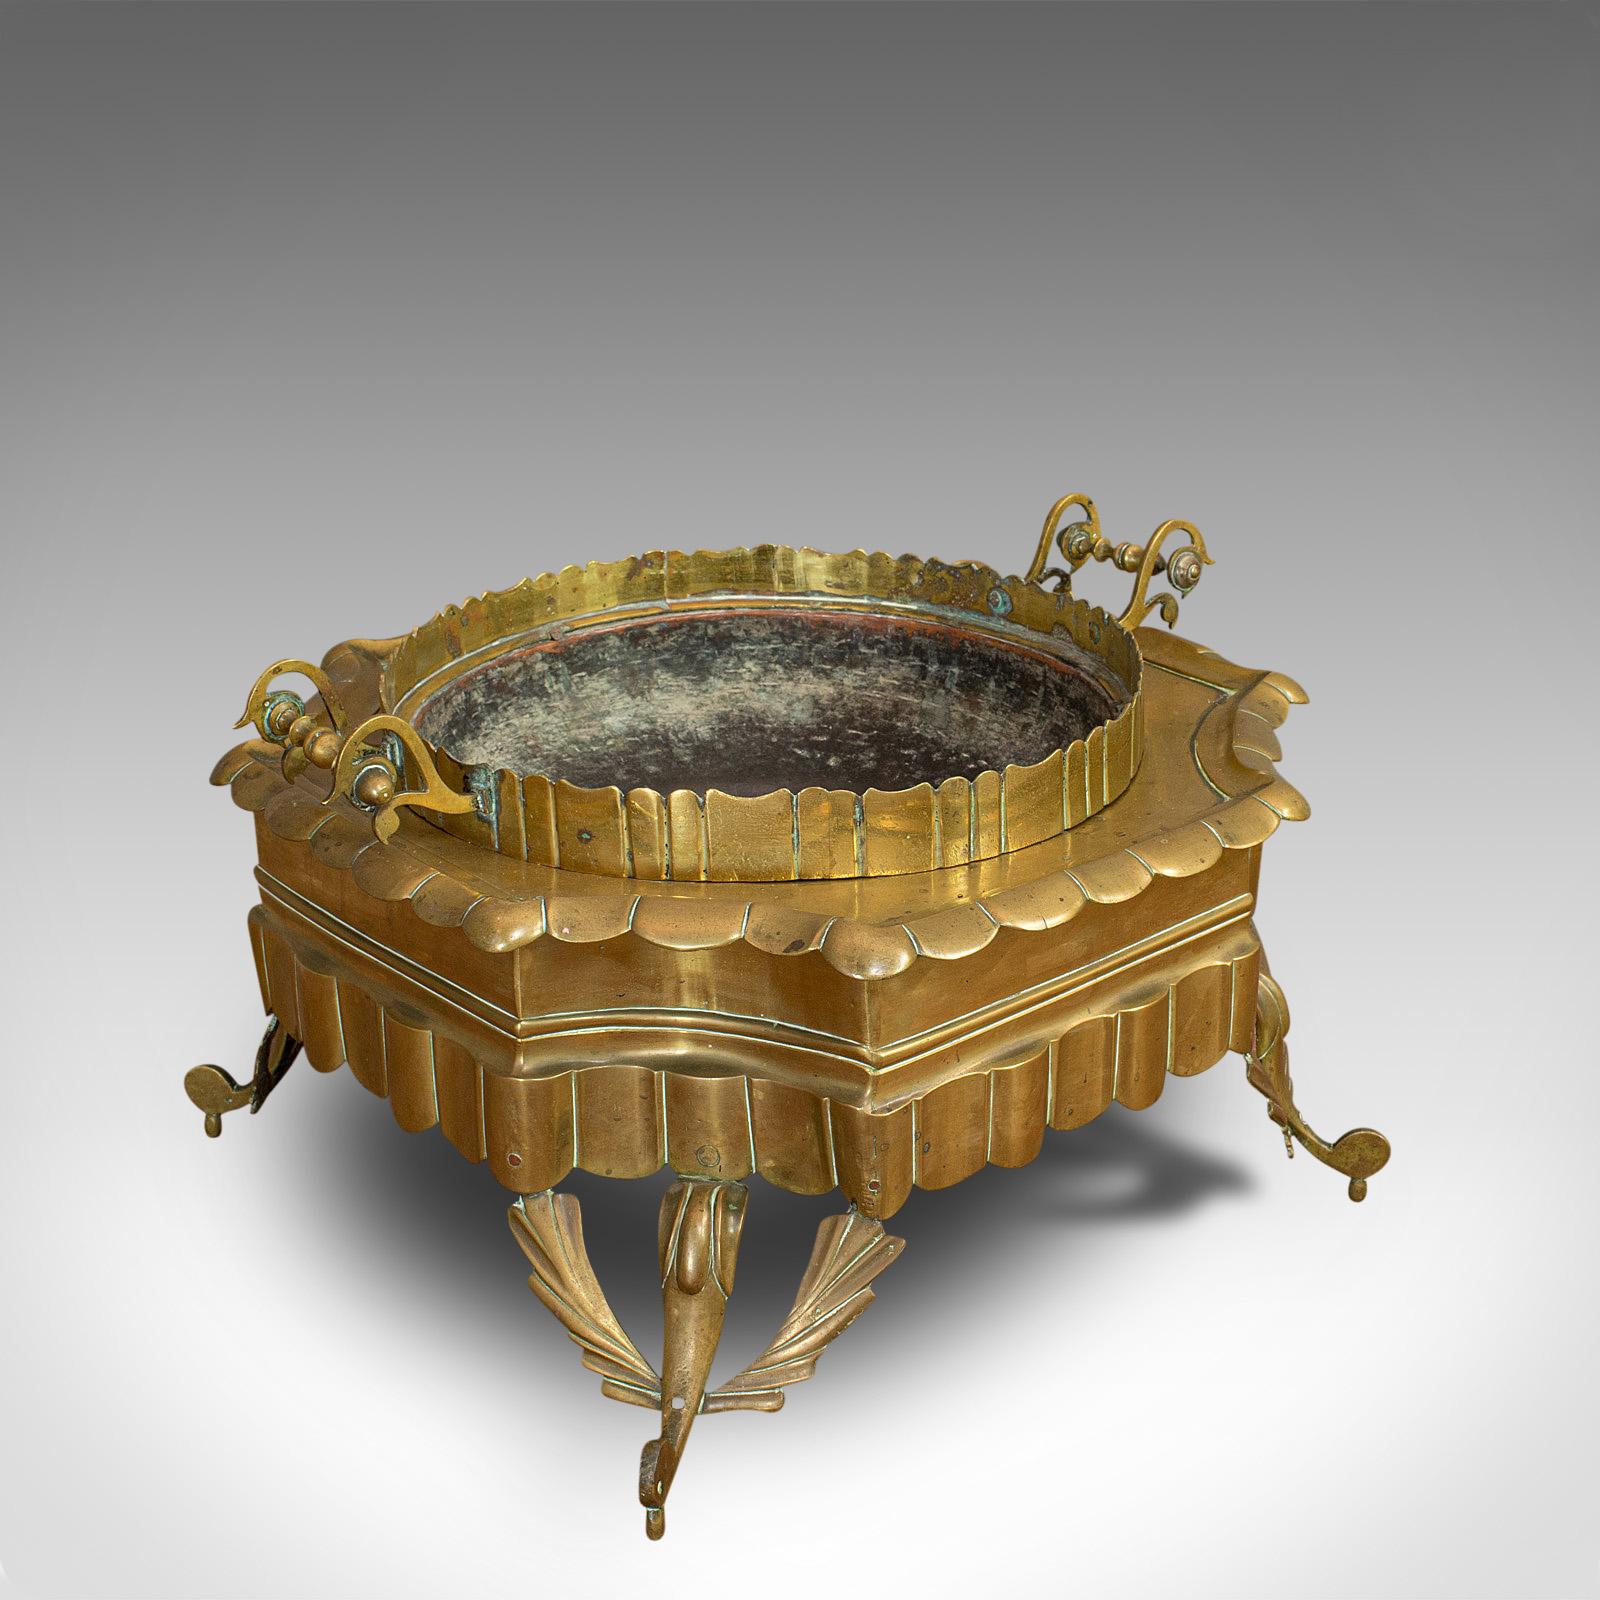 This is a large antique Islamic fire pit. An Arabic, brass ceremonial brazier, dating to the late 19th century, circa 1900.

Rich hues and appealing form
Displays a desirable aged patina
Polished brass shows fine golden hues
Liner generously